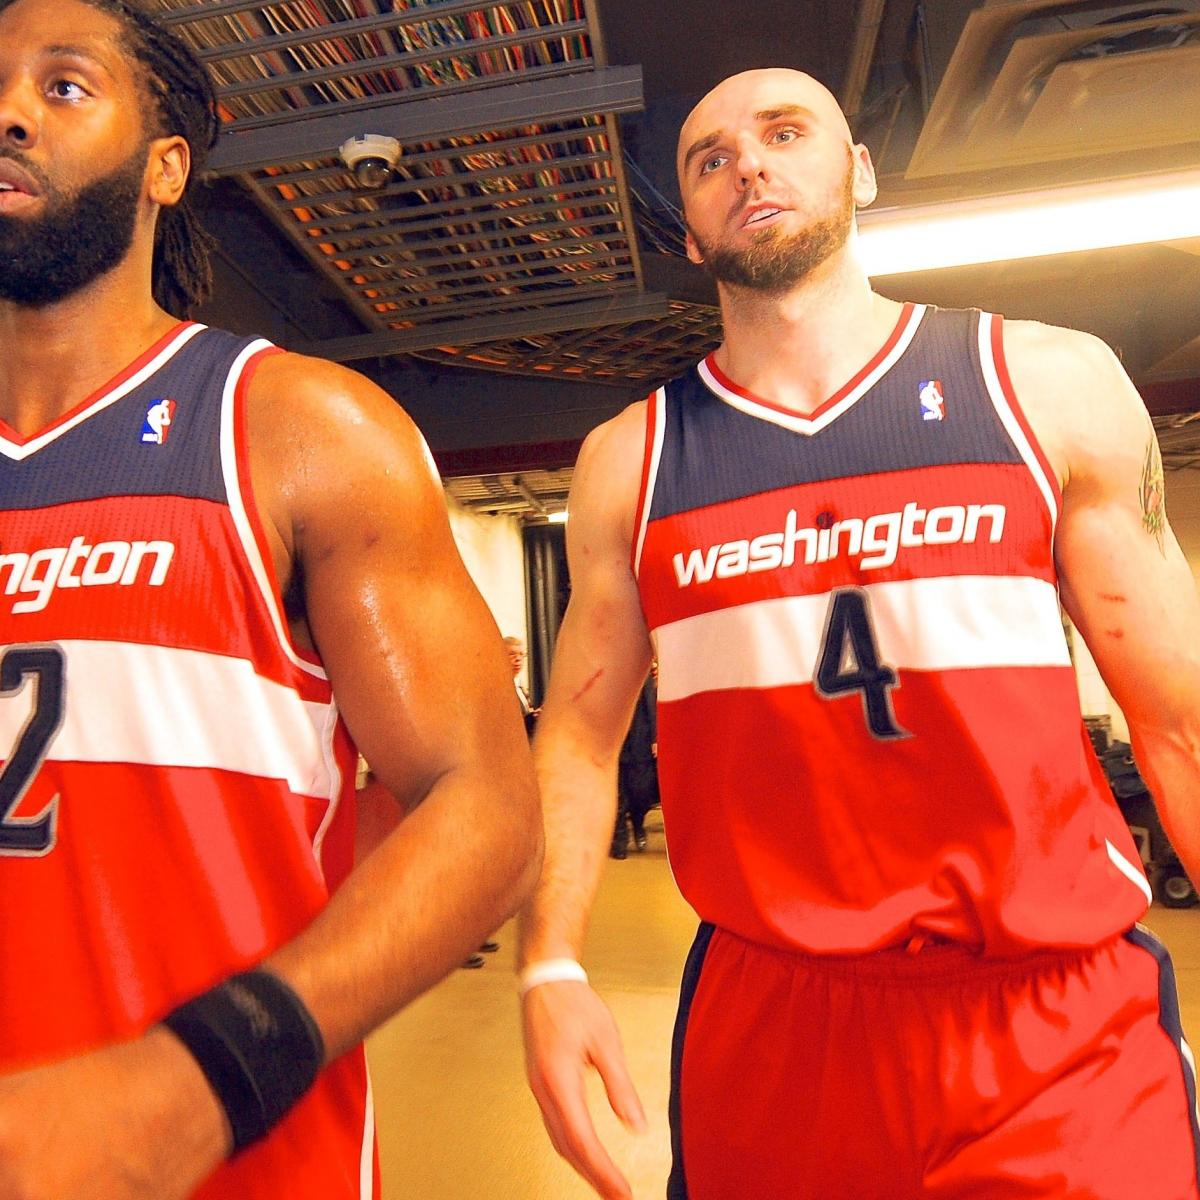 NBA Investigated Twitter Threats Made Against the Washington Wizards